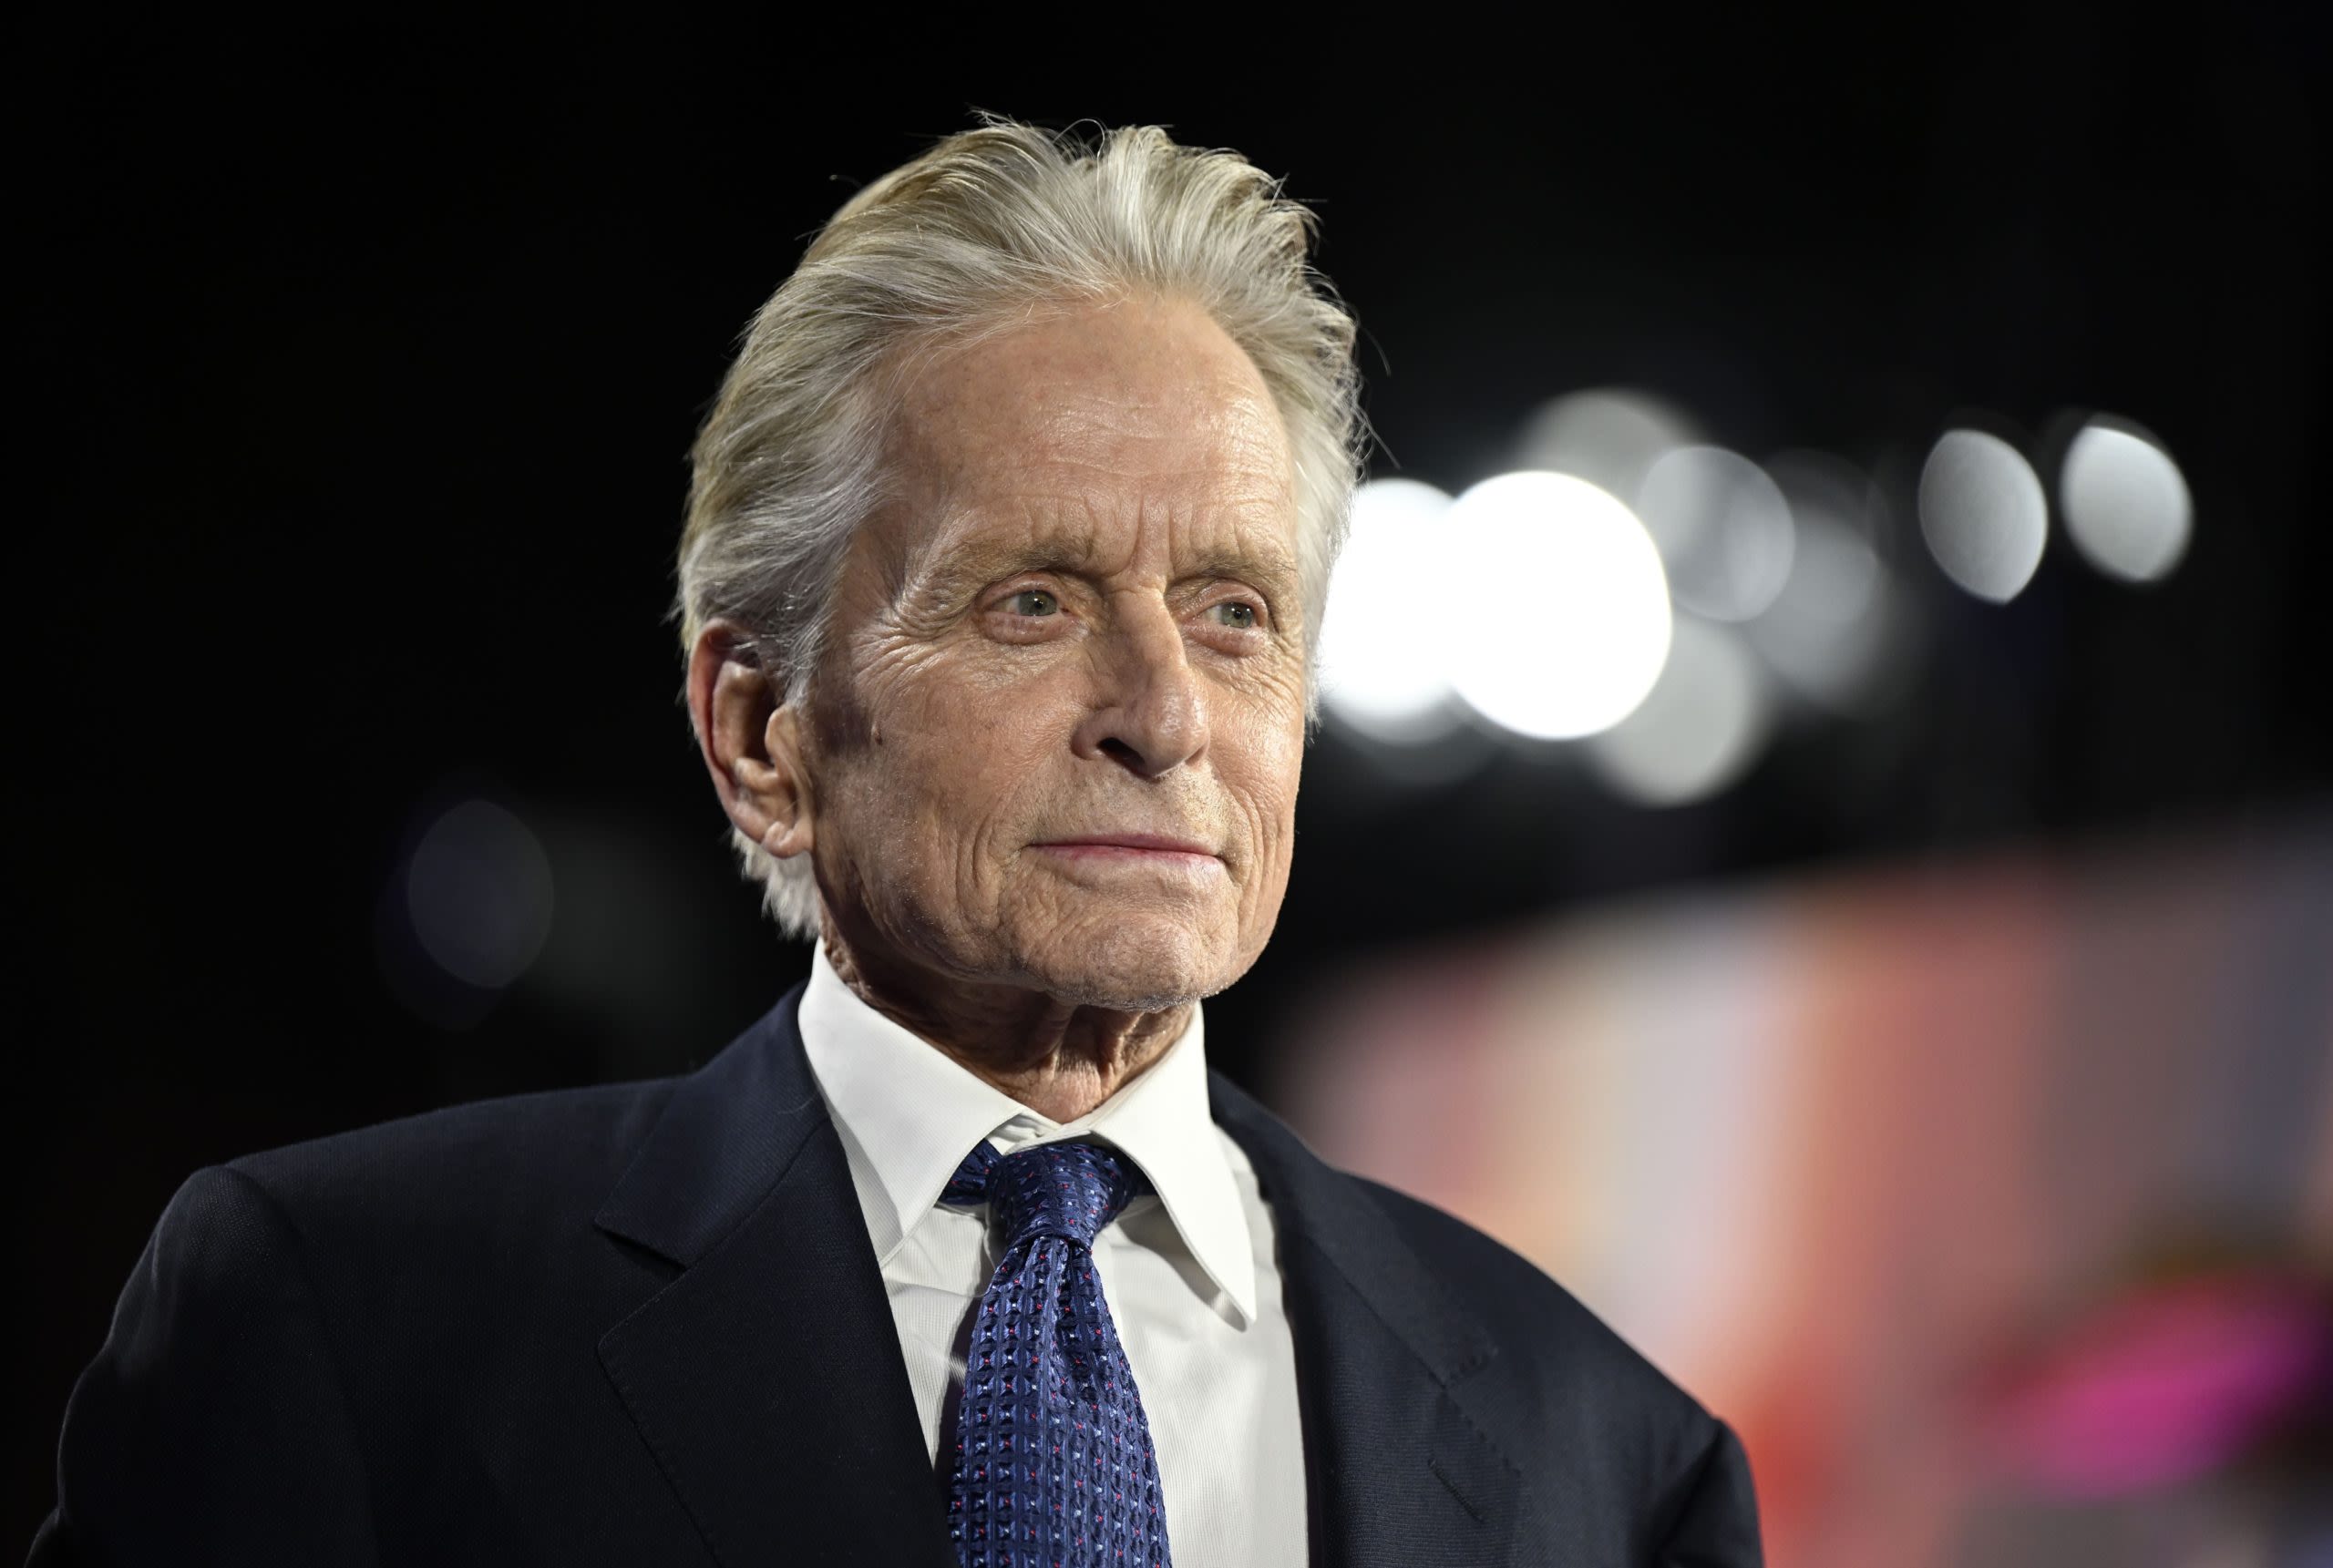 Michael Douglas Says George Clooney "Has a Valid Point" in Asking Biden to Step Aside in Election - Showbiz411